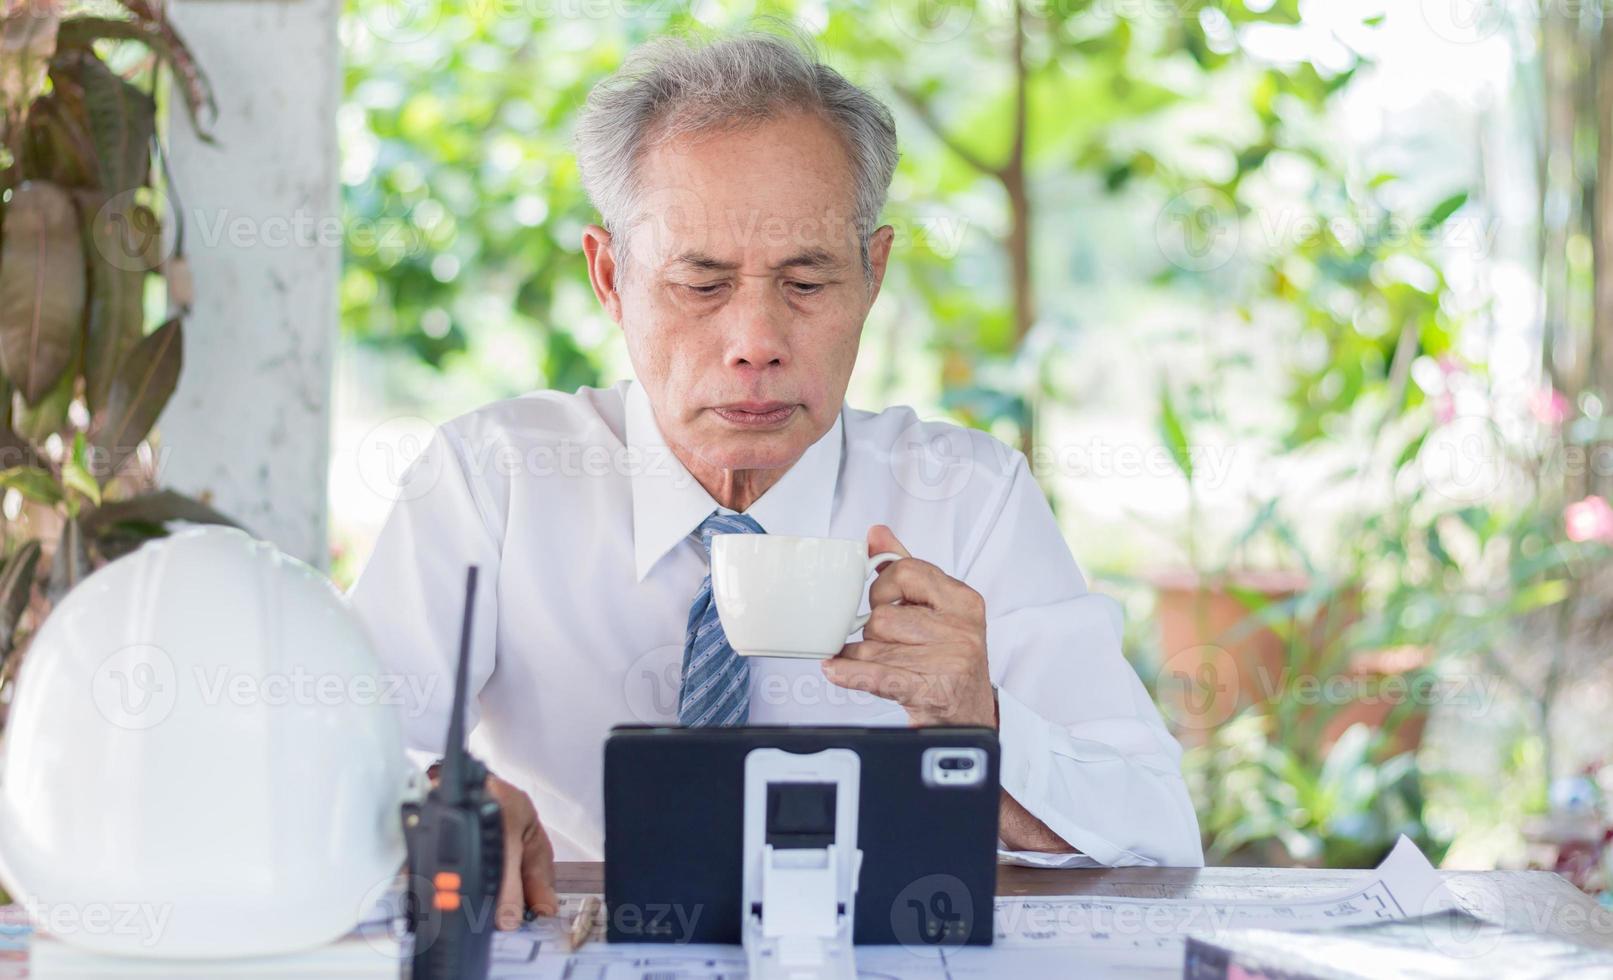 Businessman or engineer reading tablet PC while drinking coffee, Asian elders photo